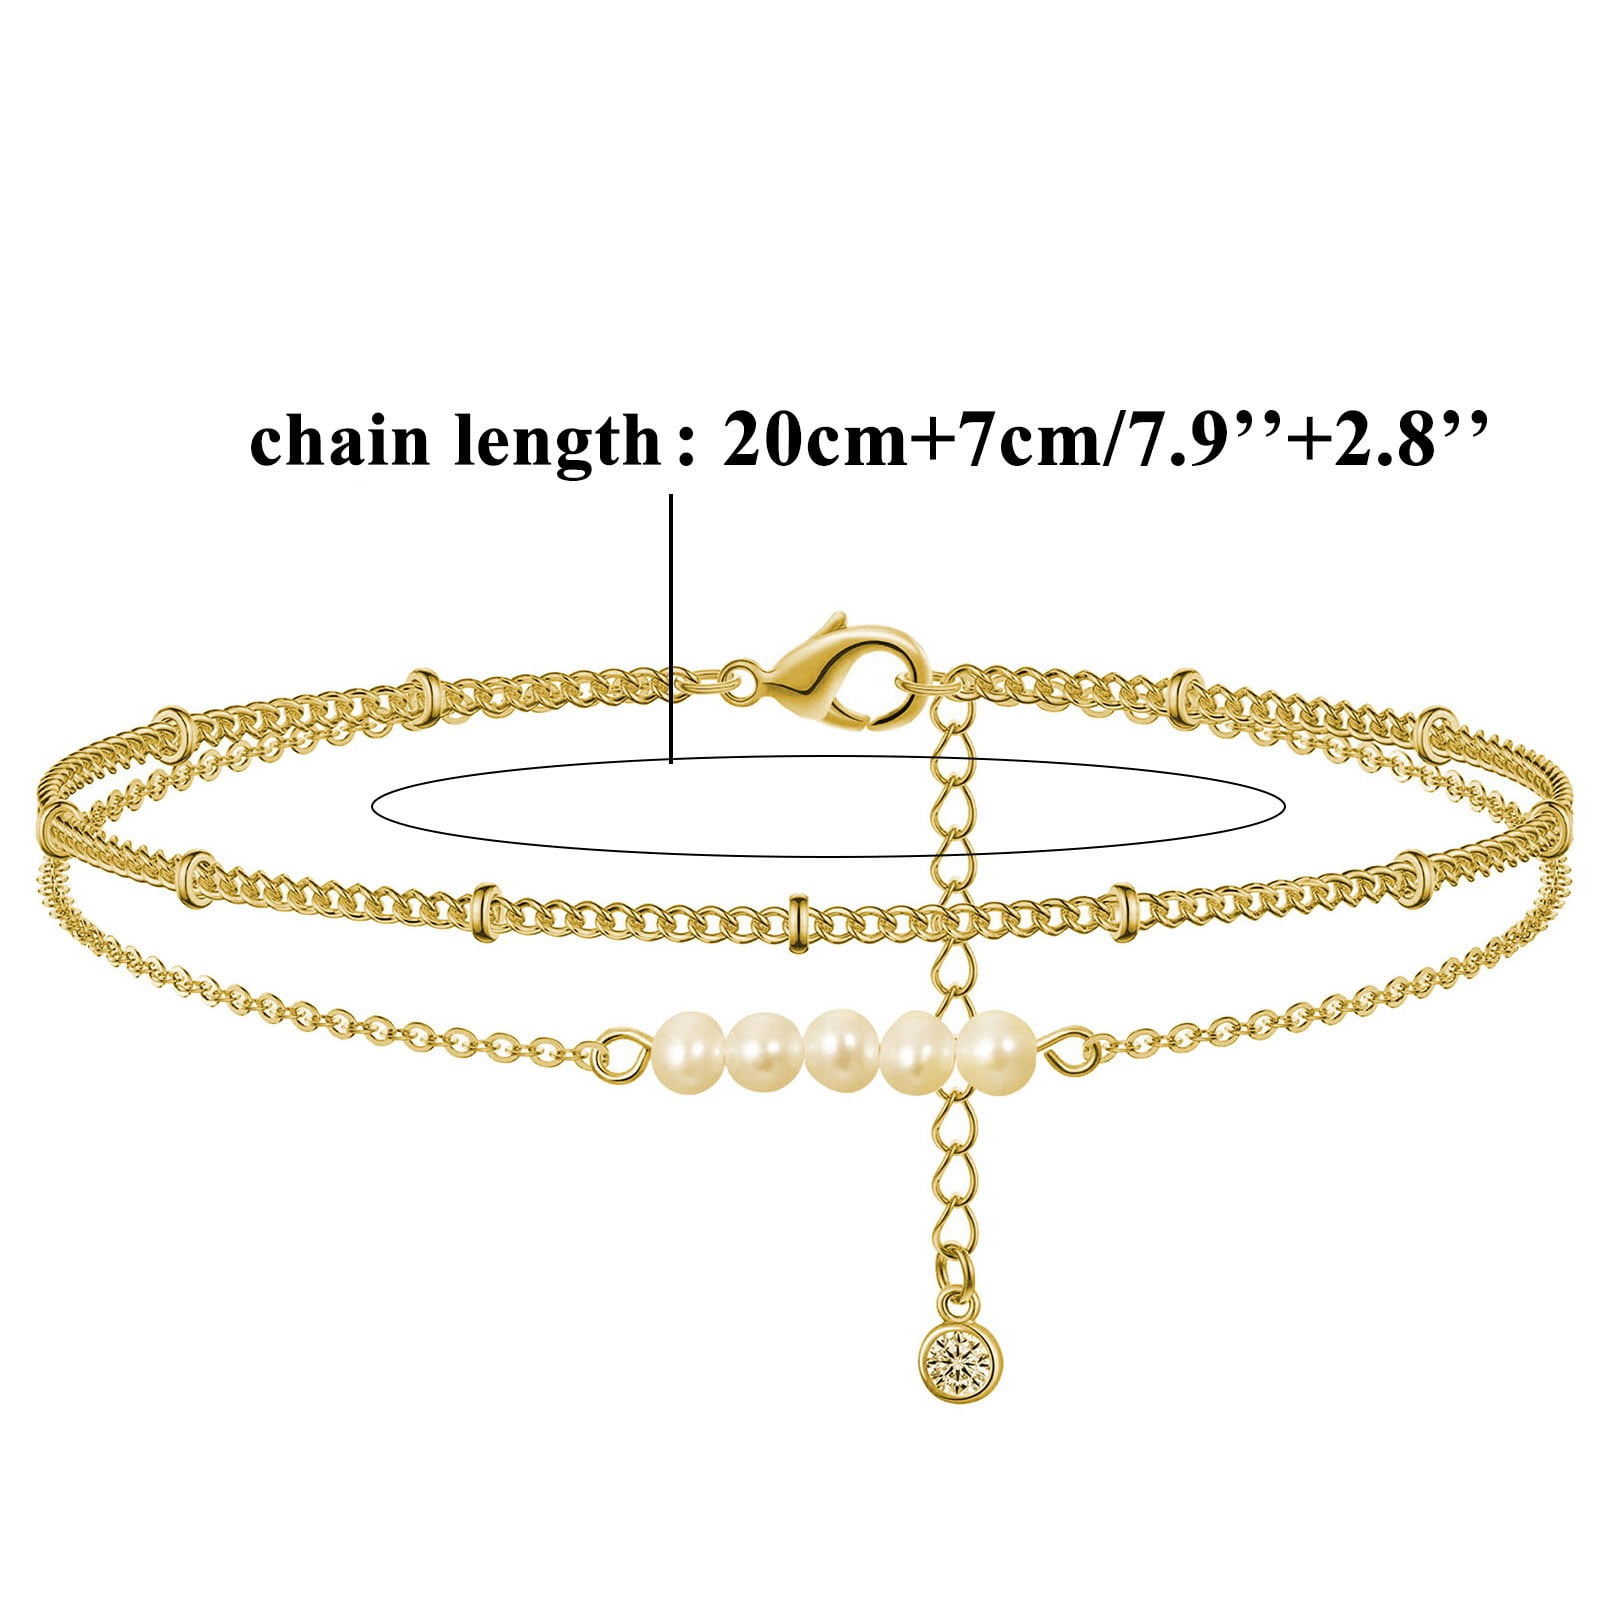 keusn boho double layer gold anklets for women pearl beads pendant foot  chains beach bracelet anklets ankle bracelet h